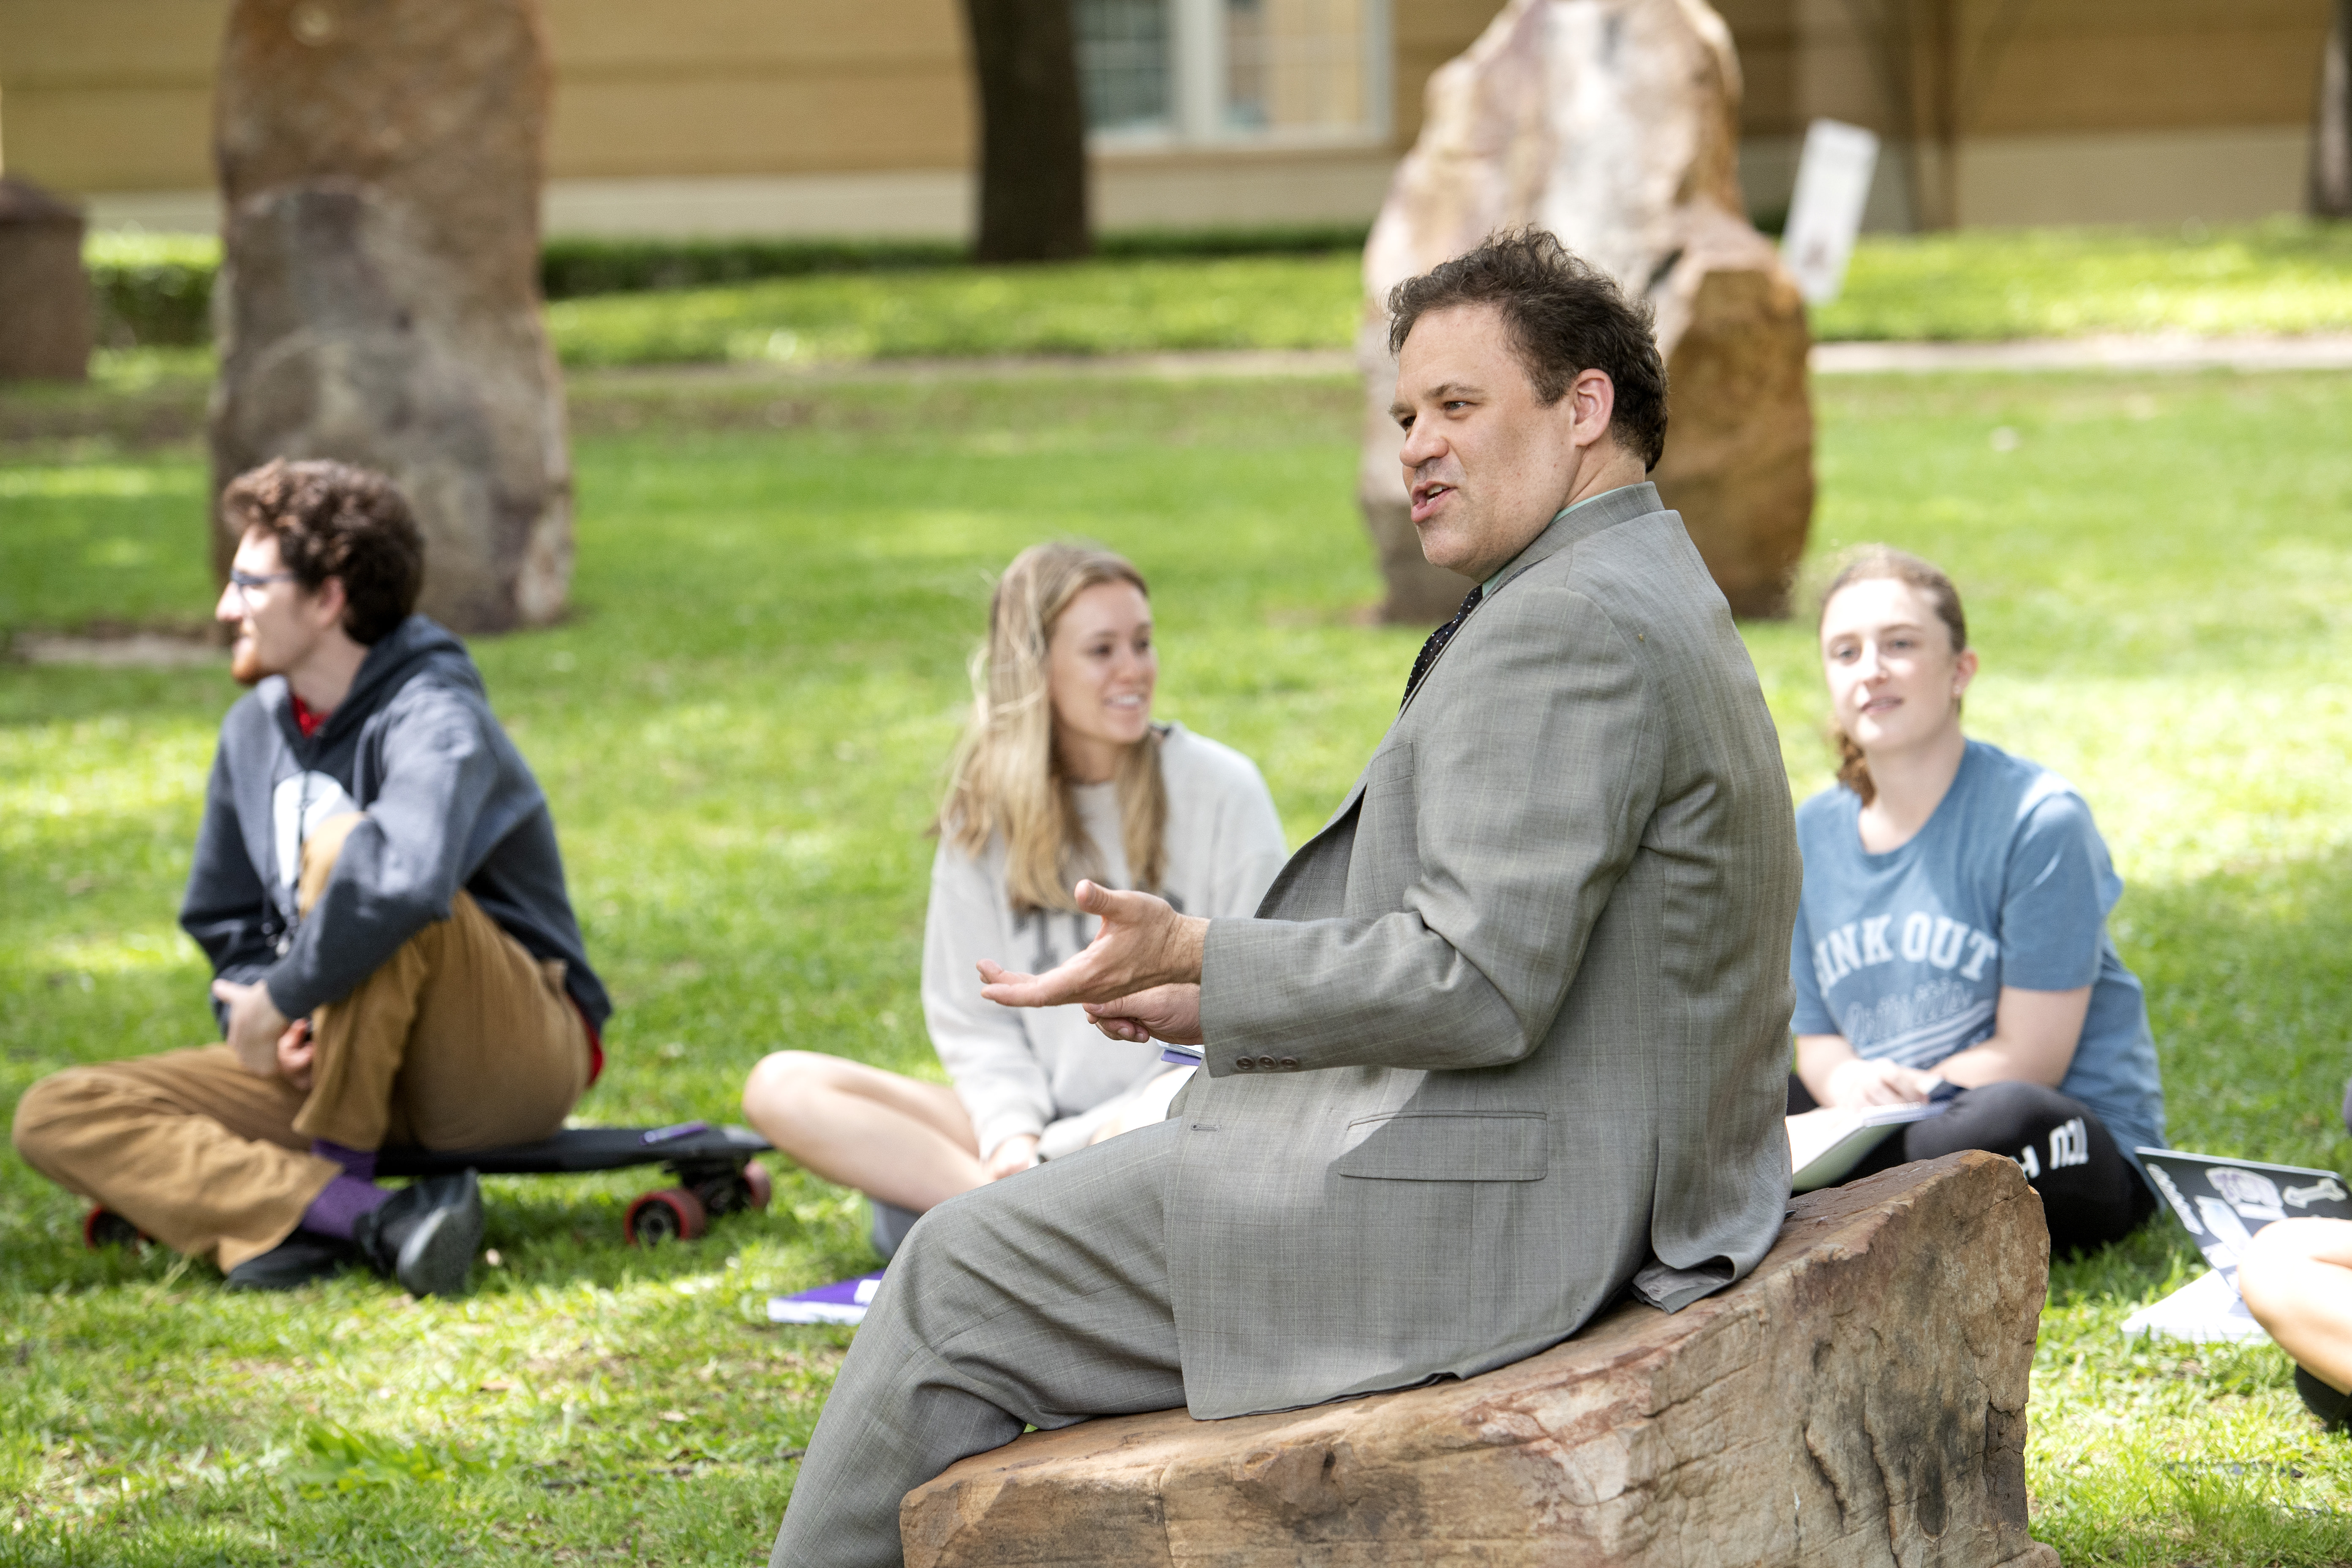 Matthew Pitt, Ph.D., speaks with students outside the College of Education in 2018. Credit TCU Marketing & Communication | photo by Jeffrey McWhorter